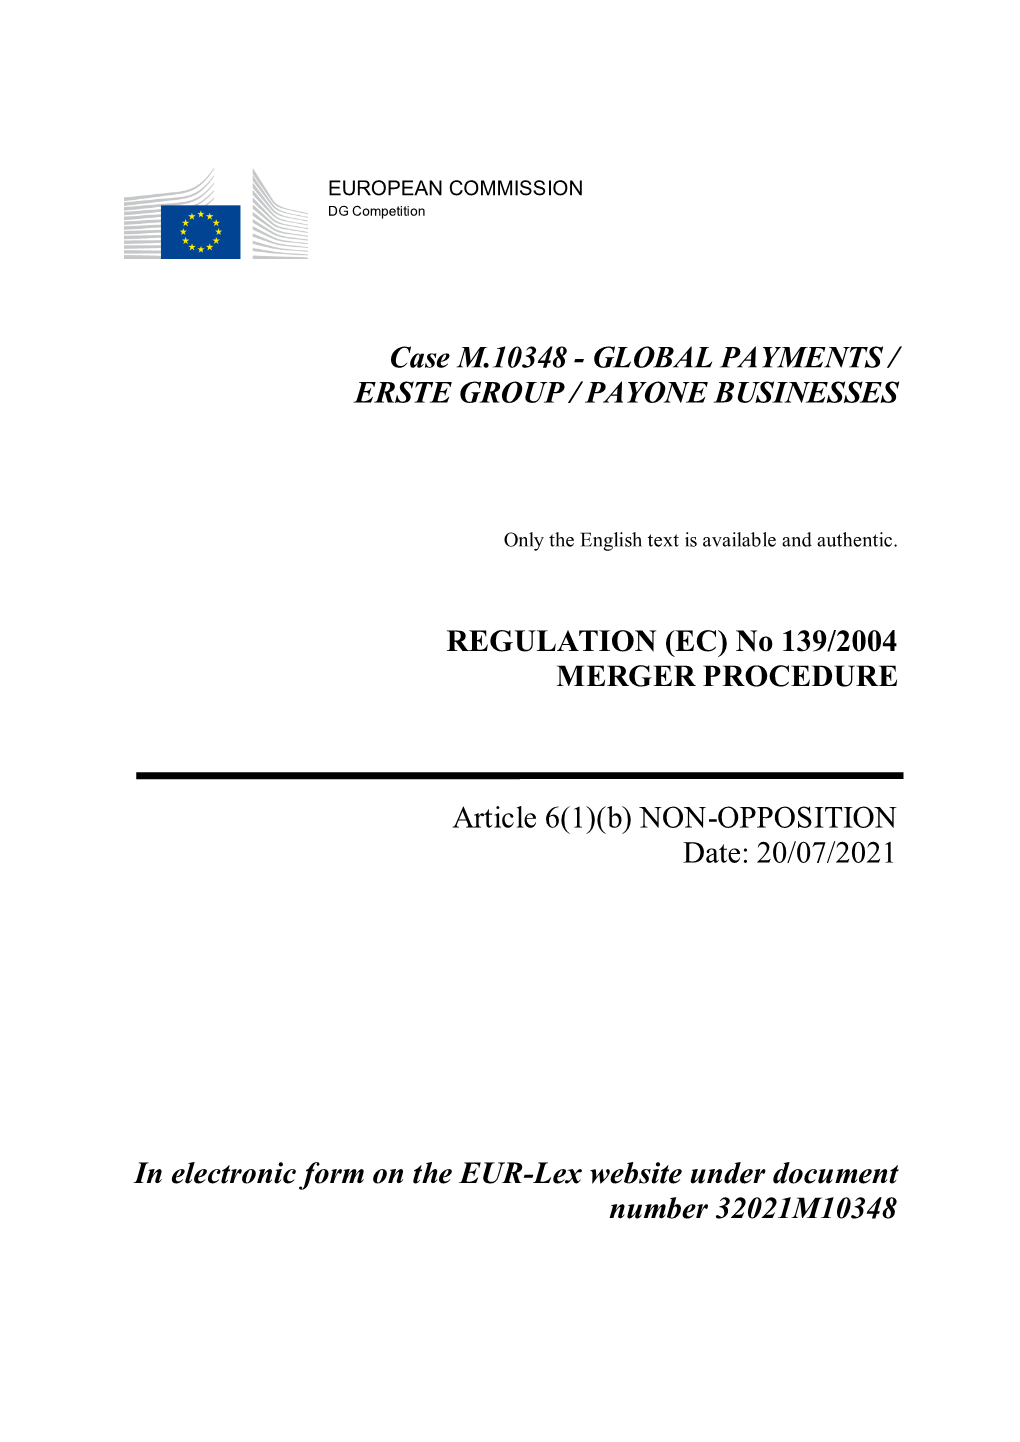 Case M.10348 - GLOBAL PAYMENTS / ERSTE GROUP / PAYONE BUSINESSES